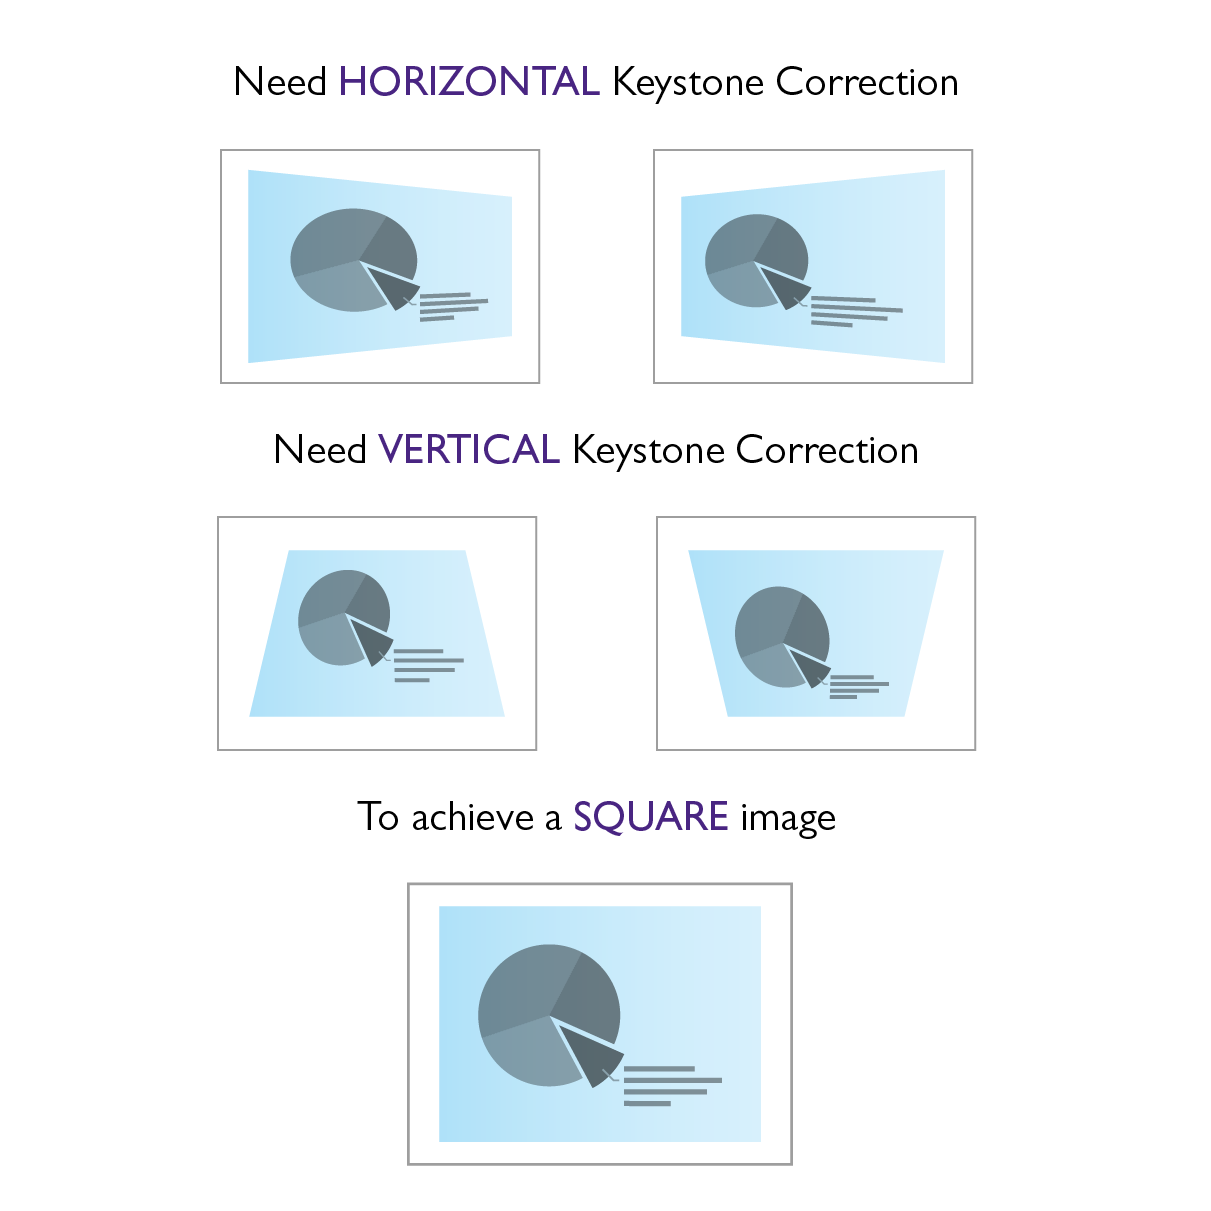 The picture shows different type of keystone corrections available on projectors. 